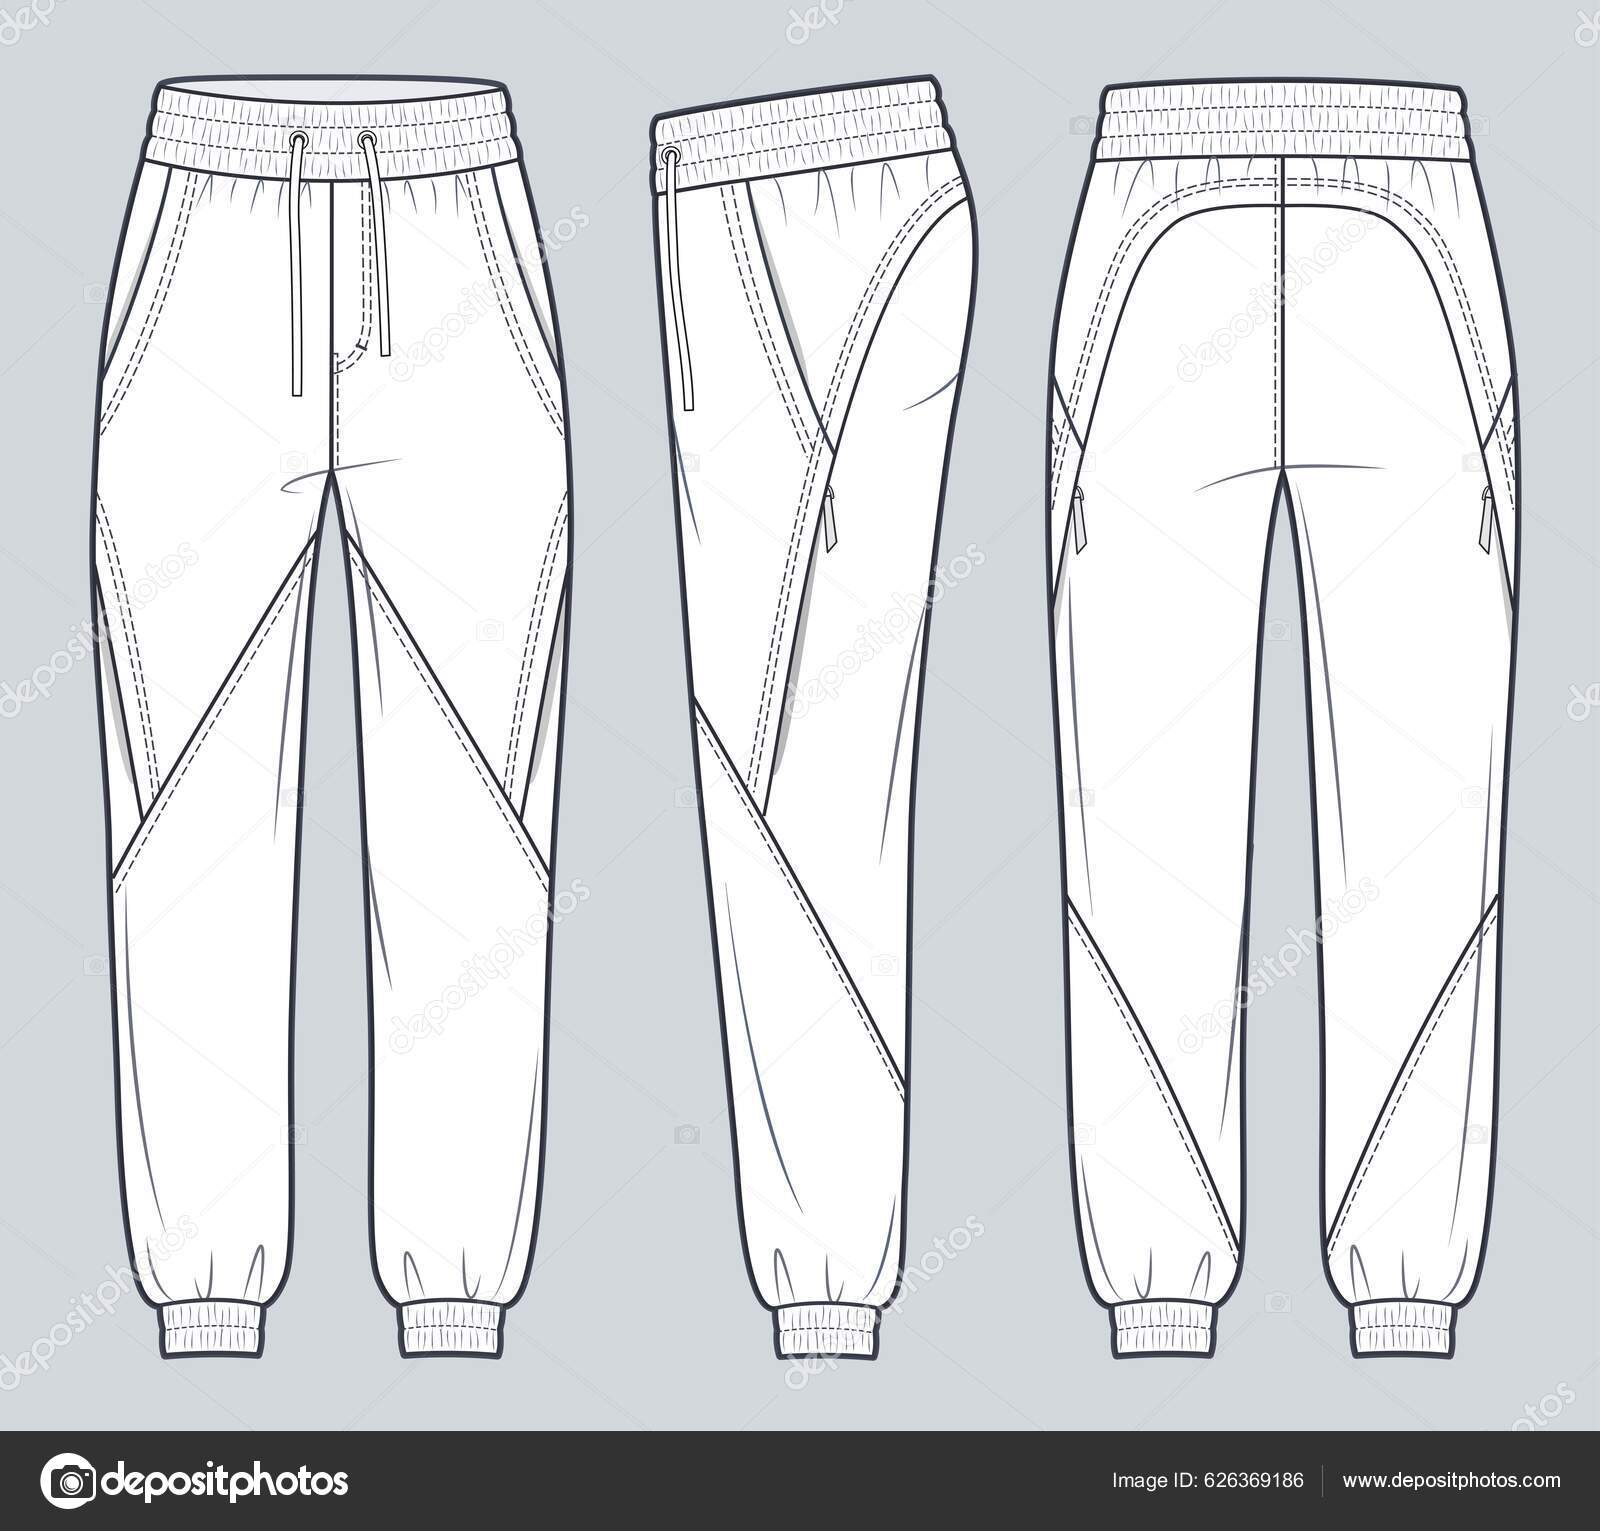 Tailored Tapered Jogger Bottom Pants Design Flat Sketch Vector  Illustration, Track Pants Concept With Front And Back View, Trouser For  Running, Jogging, Fitness, And Active Wear Pants Design. Royalty Free SVG,  Cliparts,